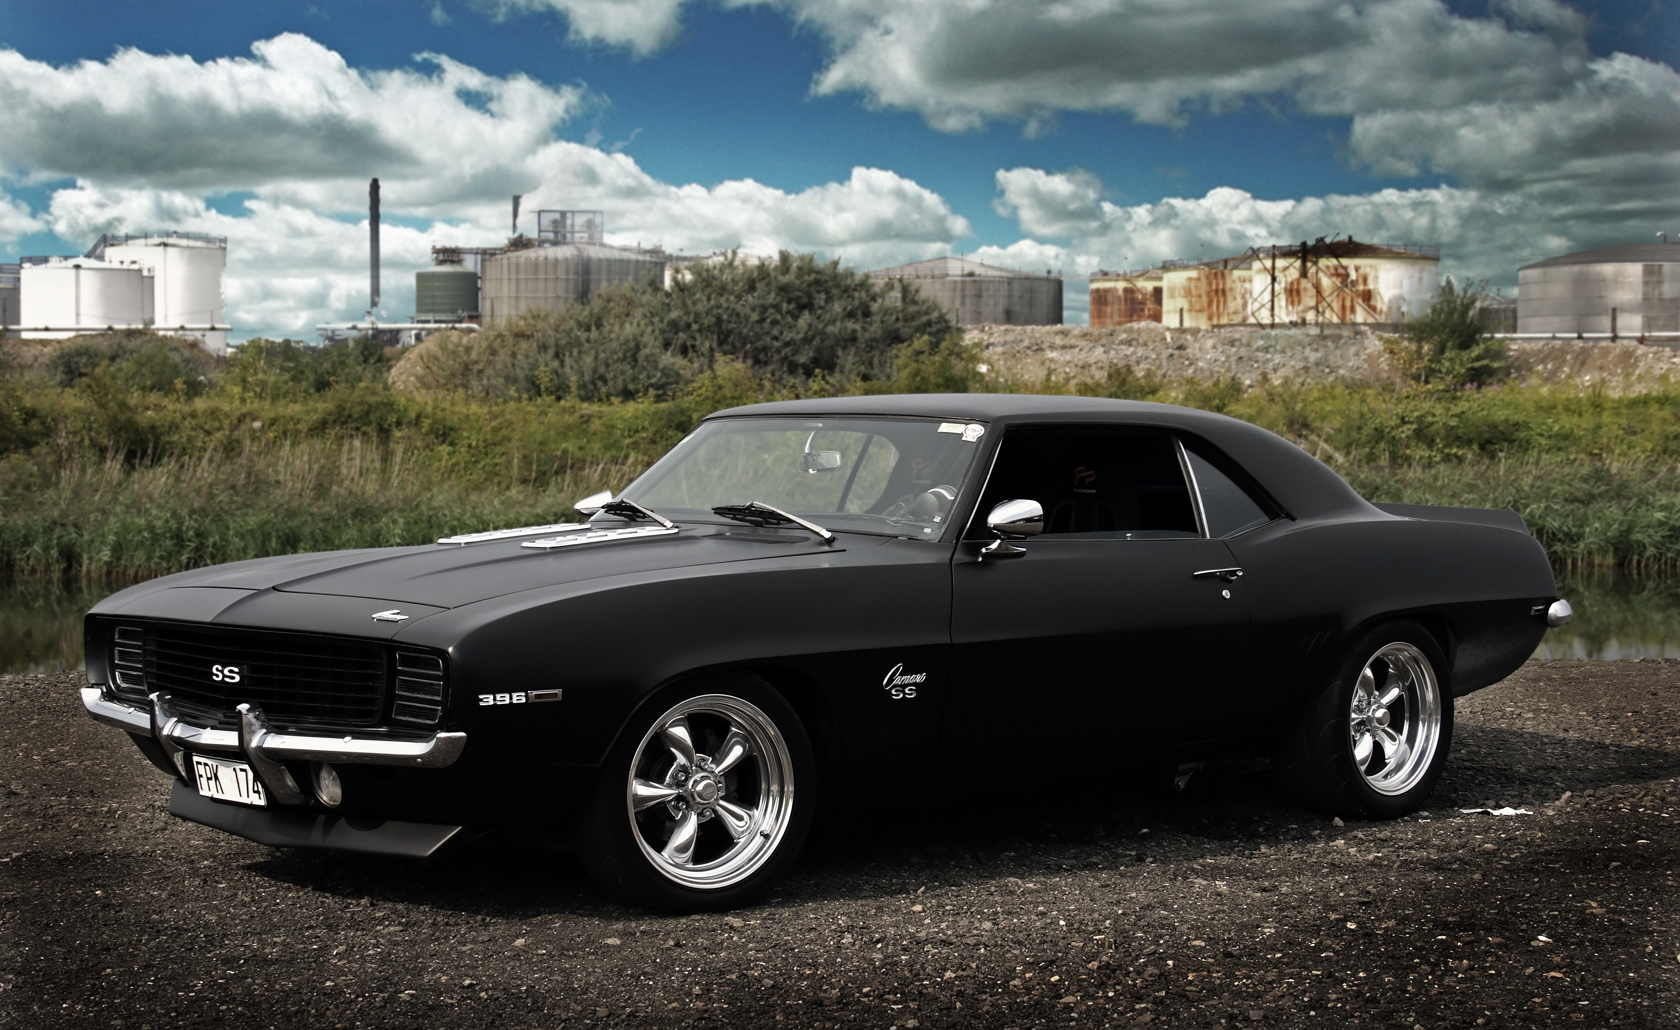 ss, Camaro, Vehicles, Cars, Auto, Chevy, Chevrolet, Muscle, Hot, Rod, Classic, Retro, Old, Wheels, Cg, Digital, Manipulation, Roads, Street, Landscapes, Sky, Clouds, Architecture, Buildings, Tuning Wallpaper